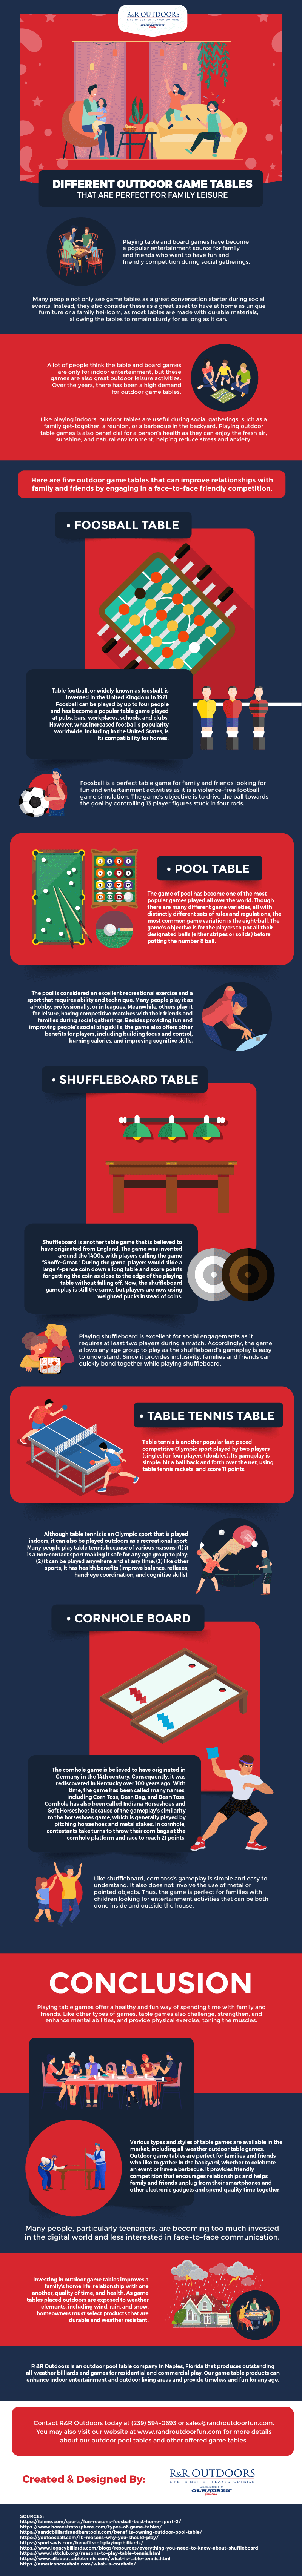 Different Outdoor Game Tables